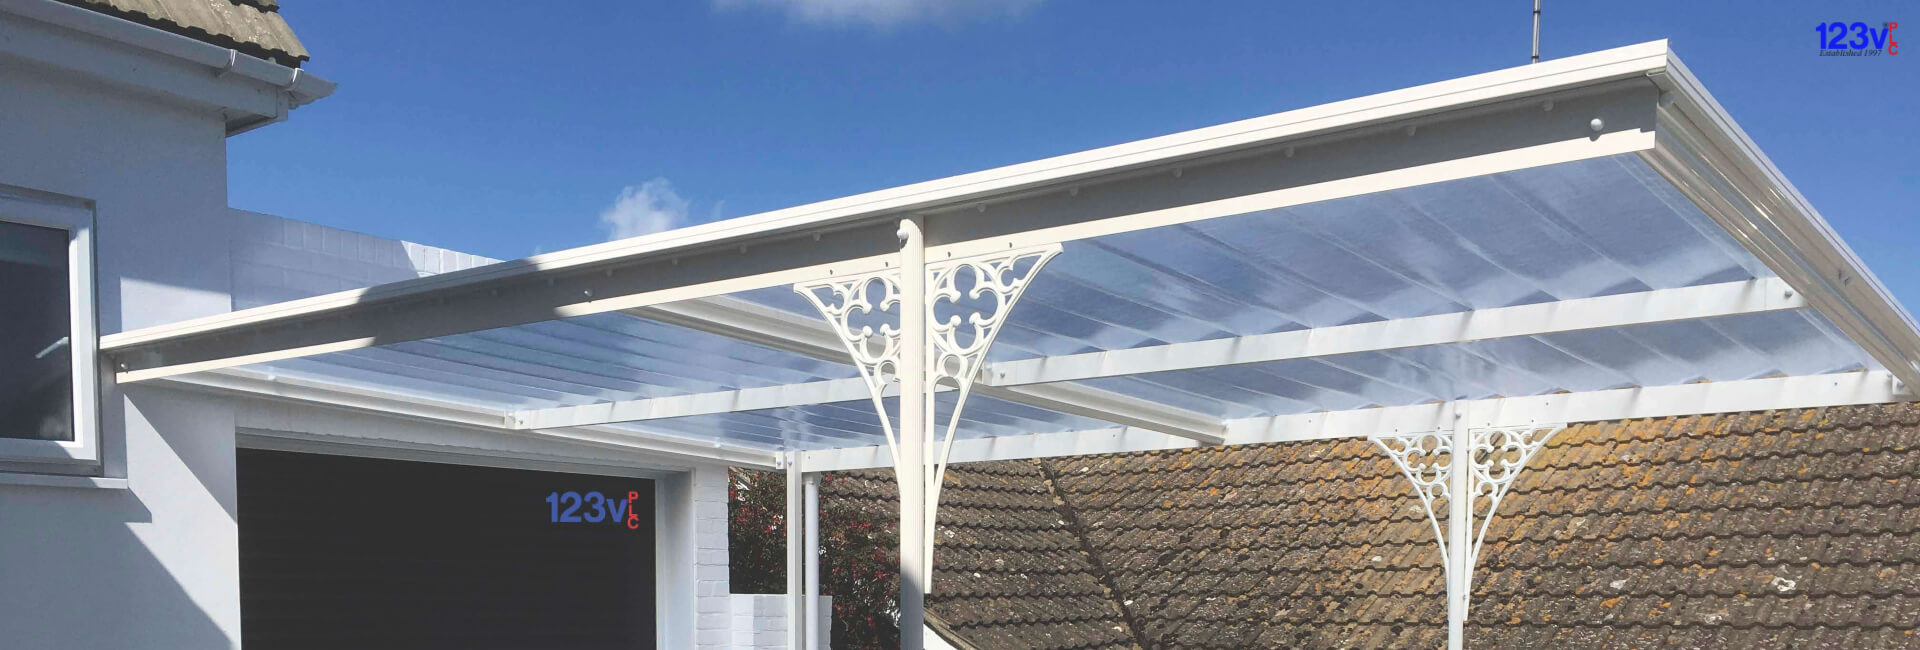 123v Carports with Ornate Spandrels in Broadstairs Kent